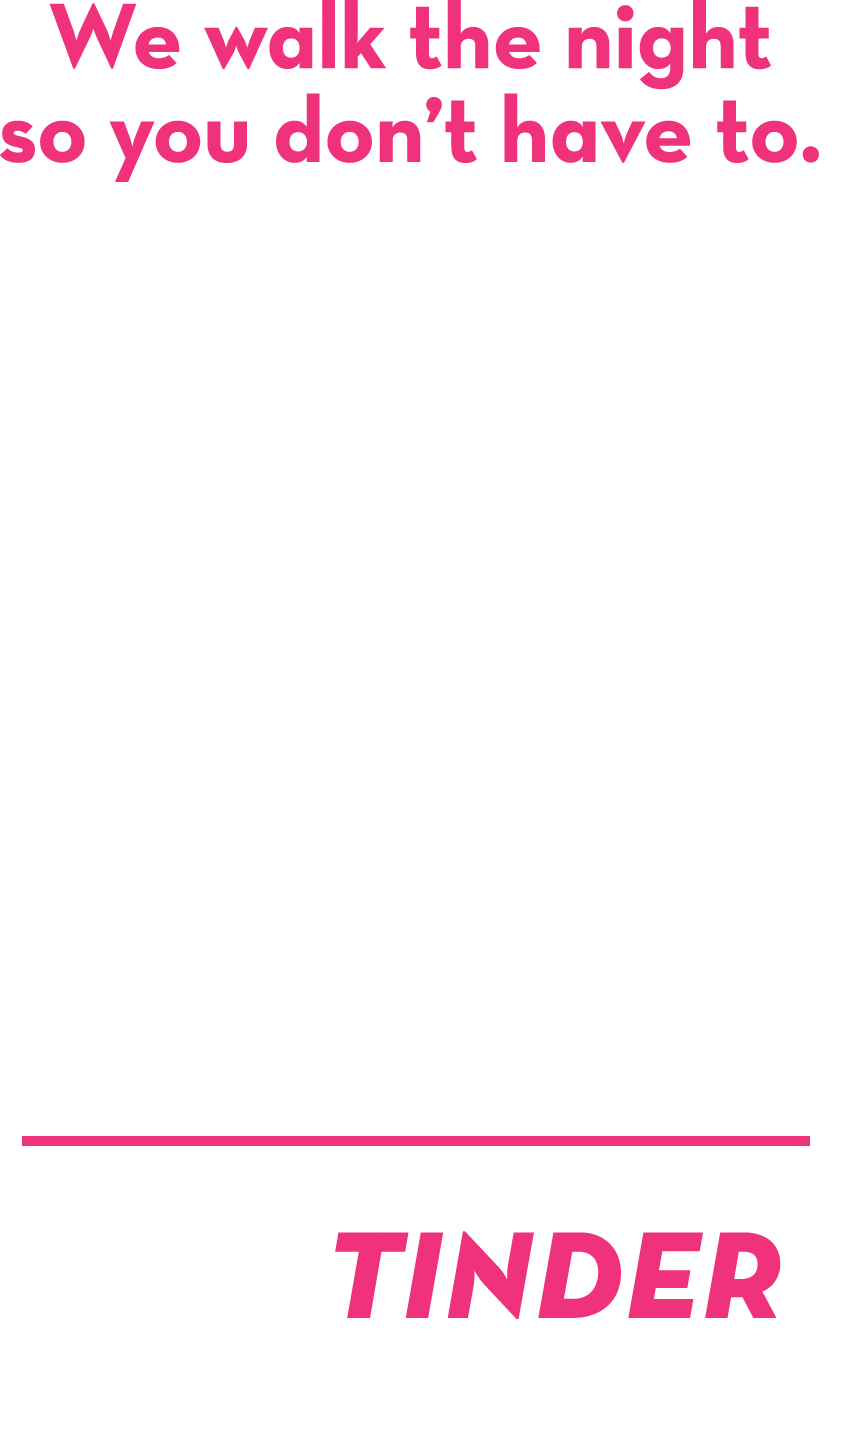 We walk the night so you don't have to. Walk the Night. The Tinder of Nightlife